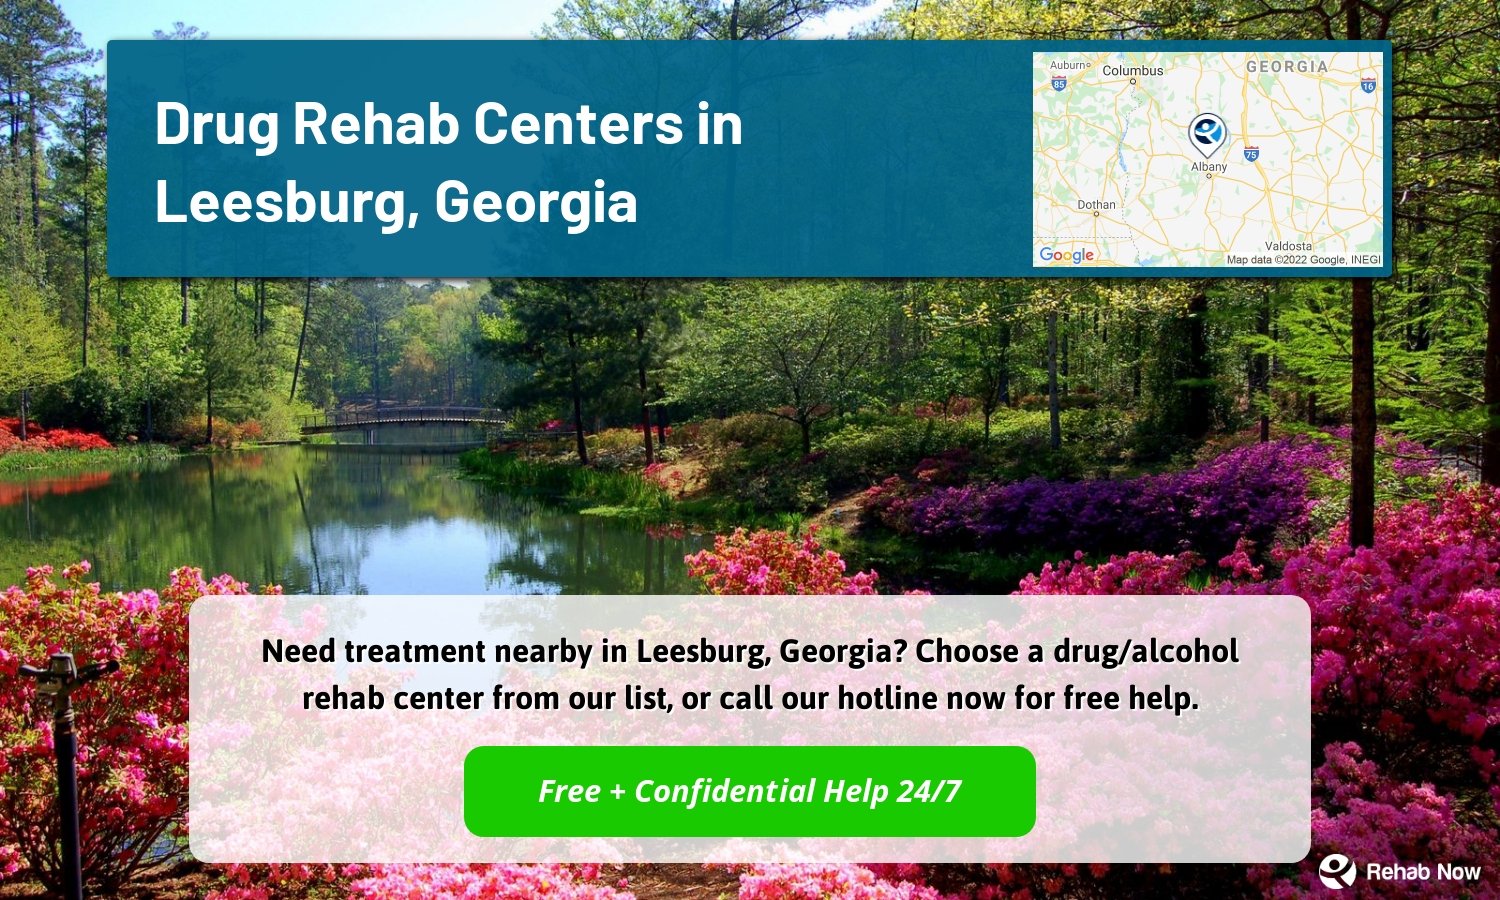 Need treatment nearby in Leesburg, Georgia? Choose a drug/alcohol rehab center from our list, or call our hotline now for free help.